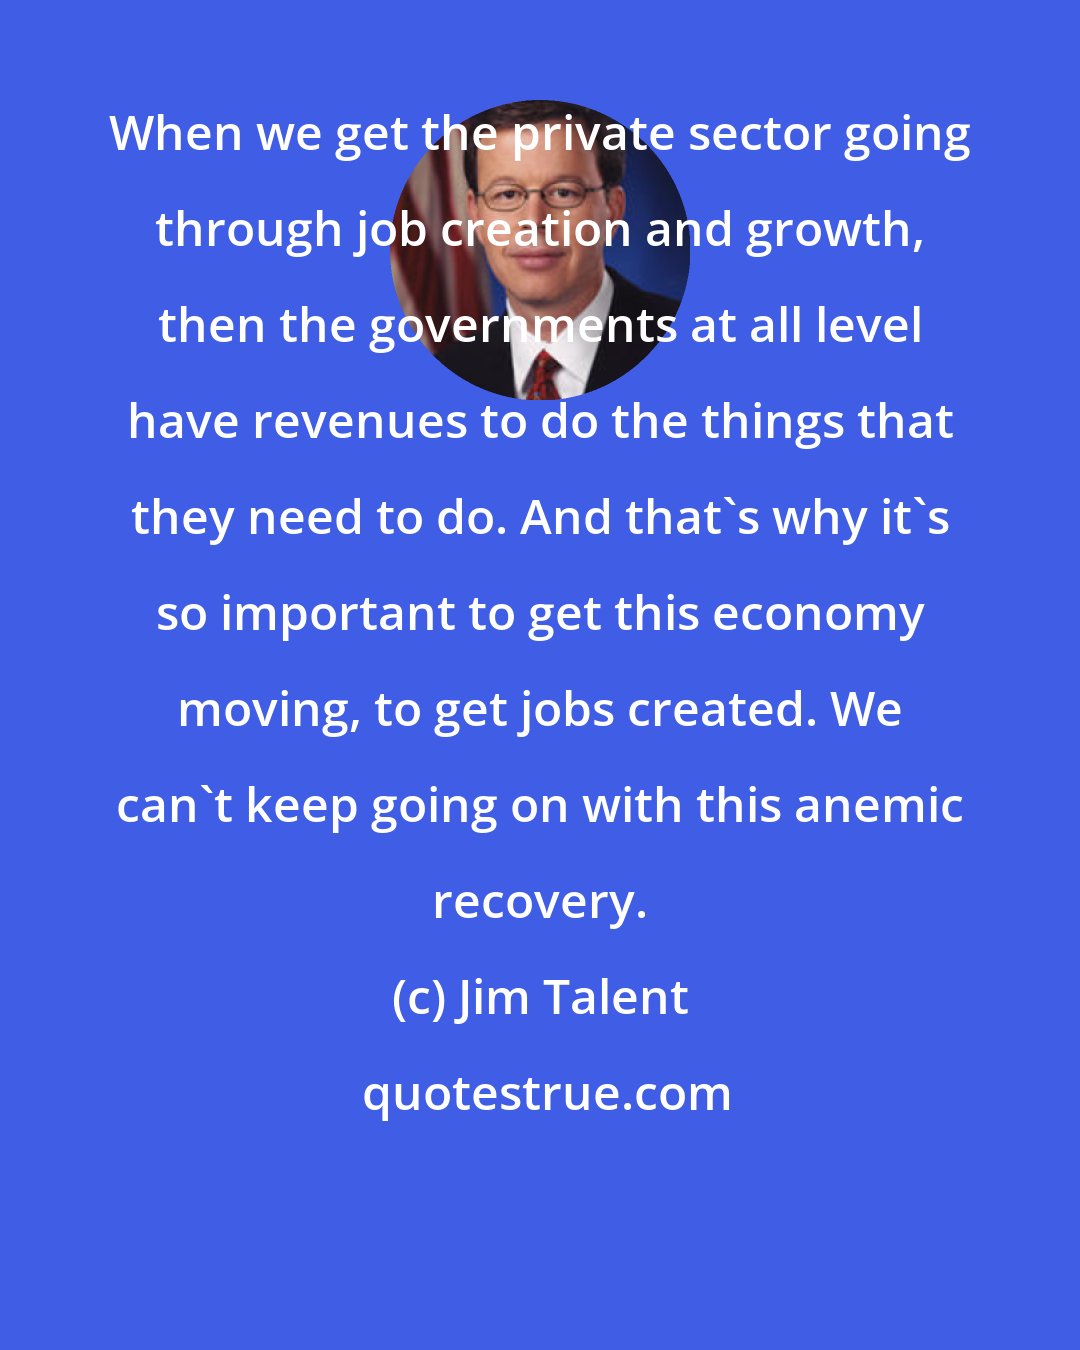 Jim Talent: When we get the private sector going through job creation and growth, then the governments at all level have revenues to do the things that they need to do. And that's why it's so important to get this economy moving, to get jobs created. We can't keep going on with this anemic recovery.